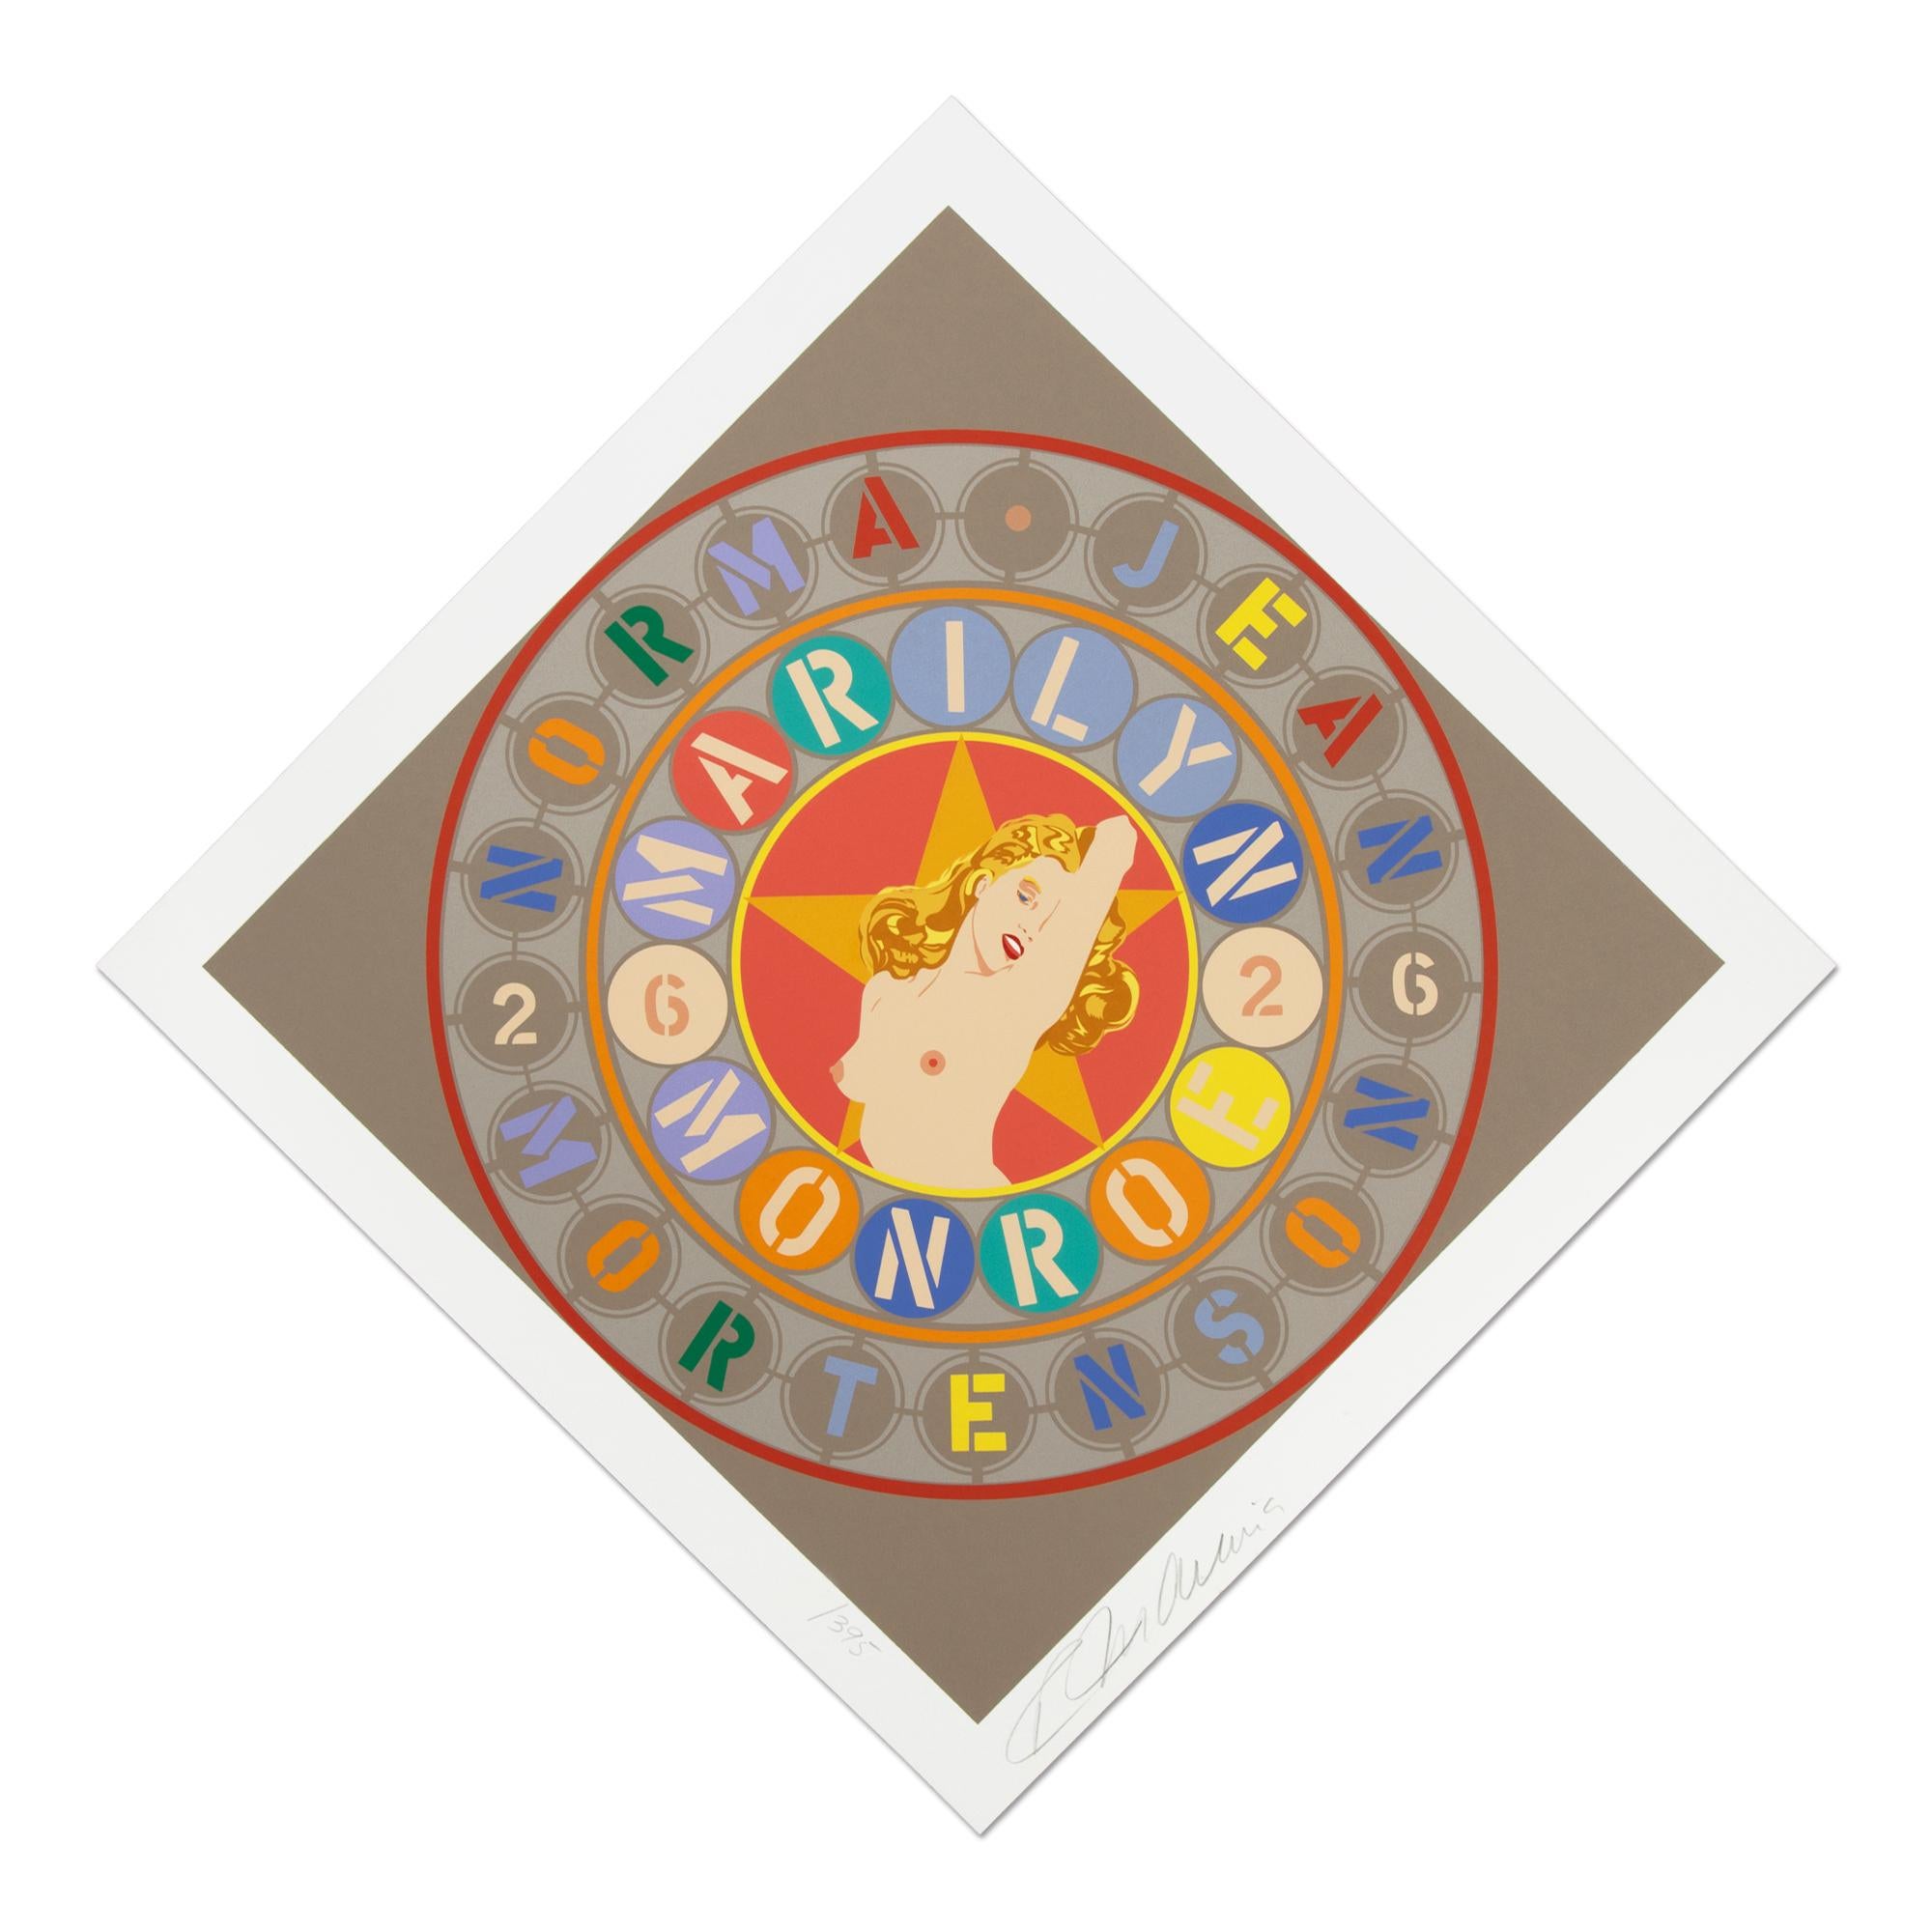 Robert Indiana (American, 1928–2018)
The Metamorphosis of Norma Jean Mortenson, 1997
Medium: Screenprint in colors on paper
Dimensions: 15 9/10 × 15 9/10 in (40.5 × 40.5 cm)
Edition of 395: Hand-signed and numbered
Condition: Excellent
